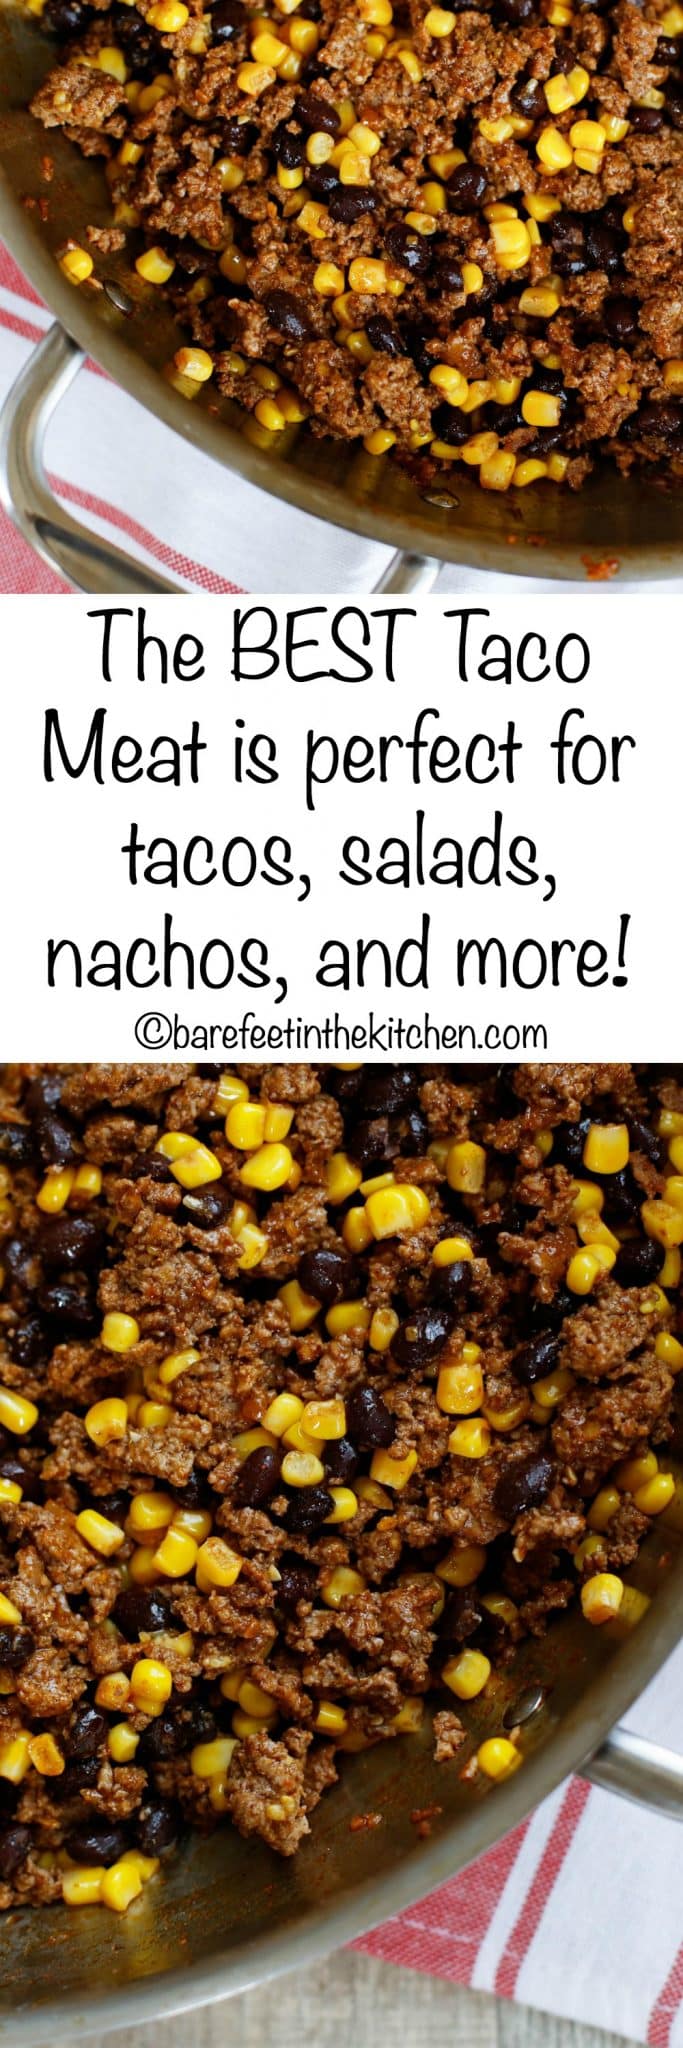 The Best Taco Meat You've Ever Tasted! | Barefeet In The Kitchen